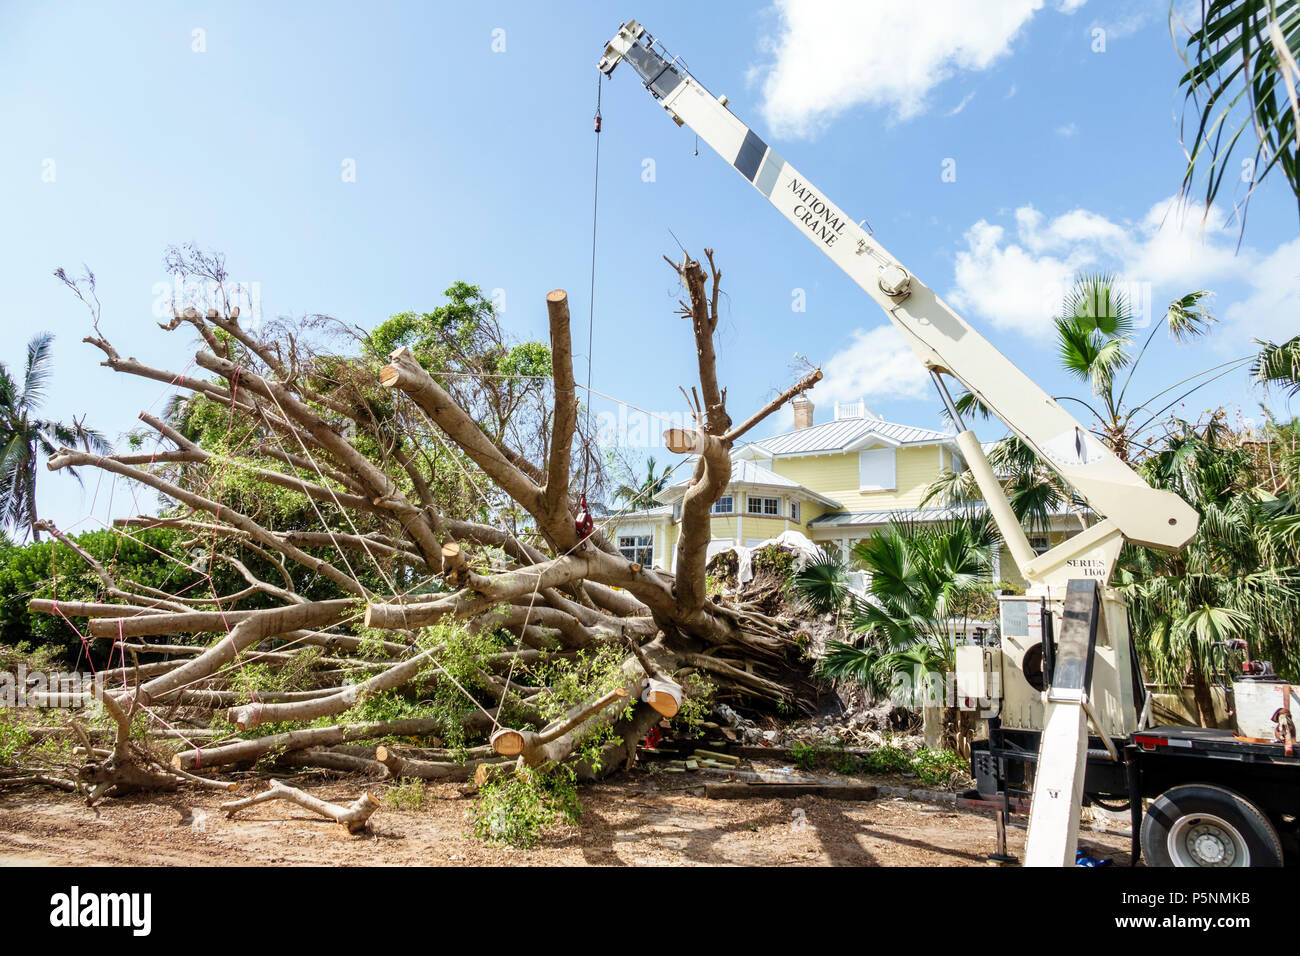 Naples Florida,Crayton Road,Hurricane Irma,wind damage destruction aftermath,fallen trees,removal,crane,storm disaster recovery cleanup,front yard,FL1 Stock Photo